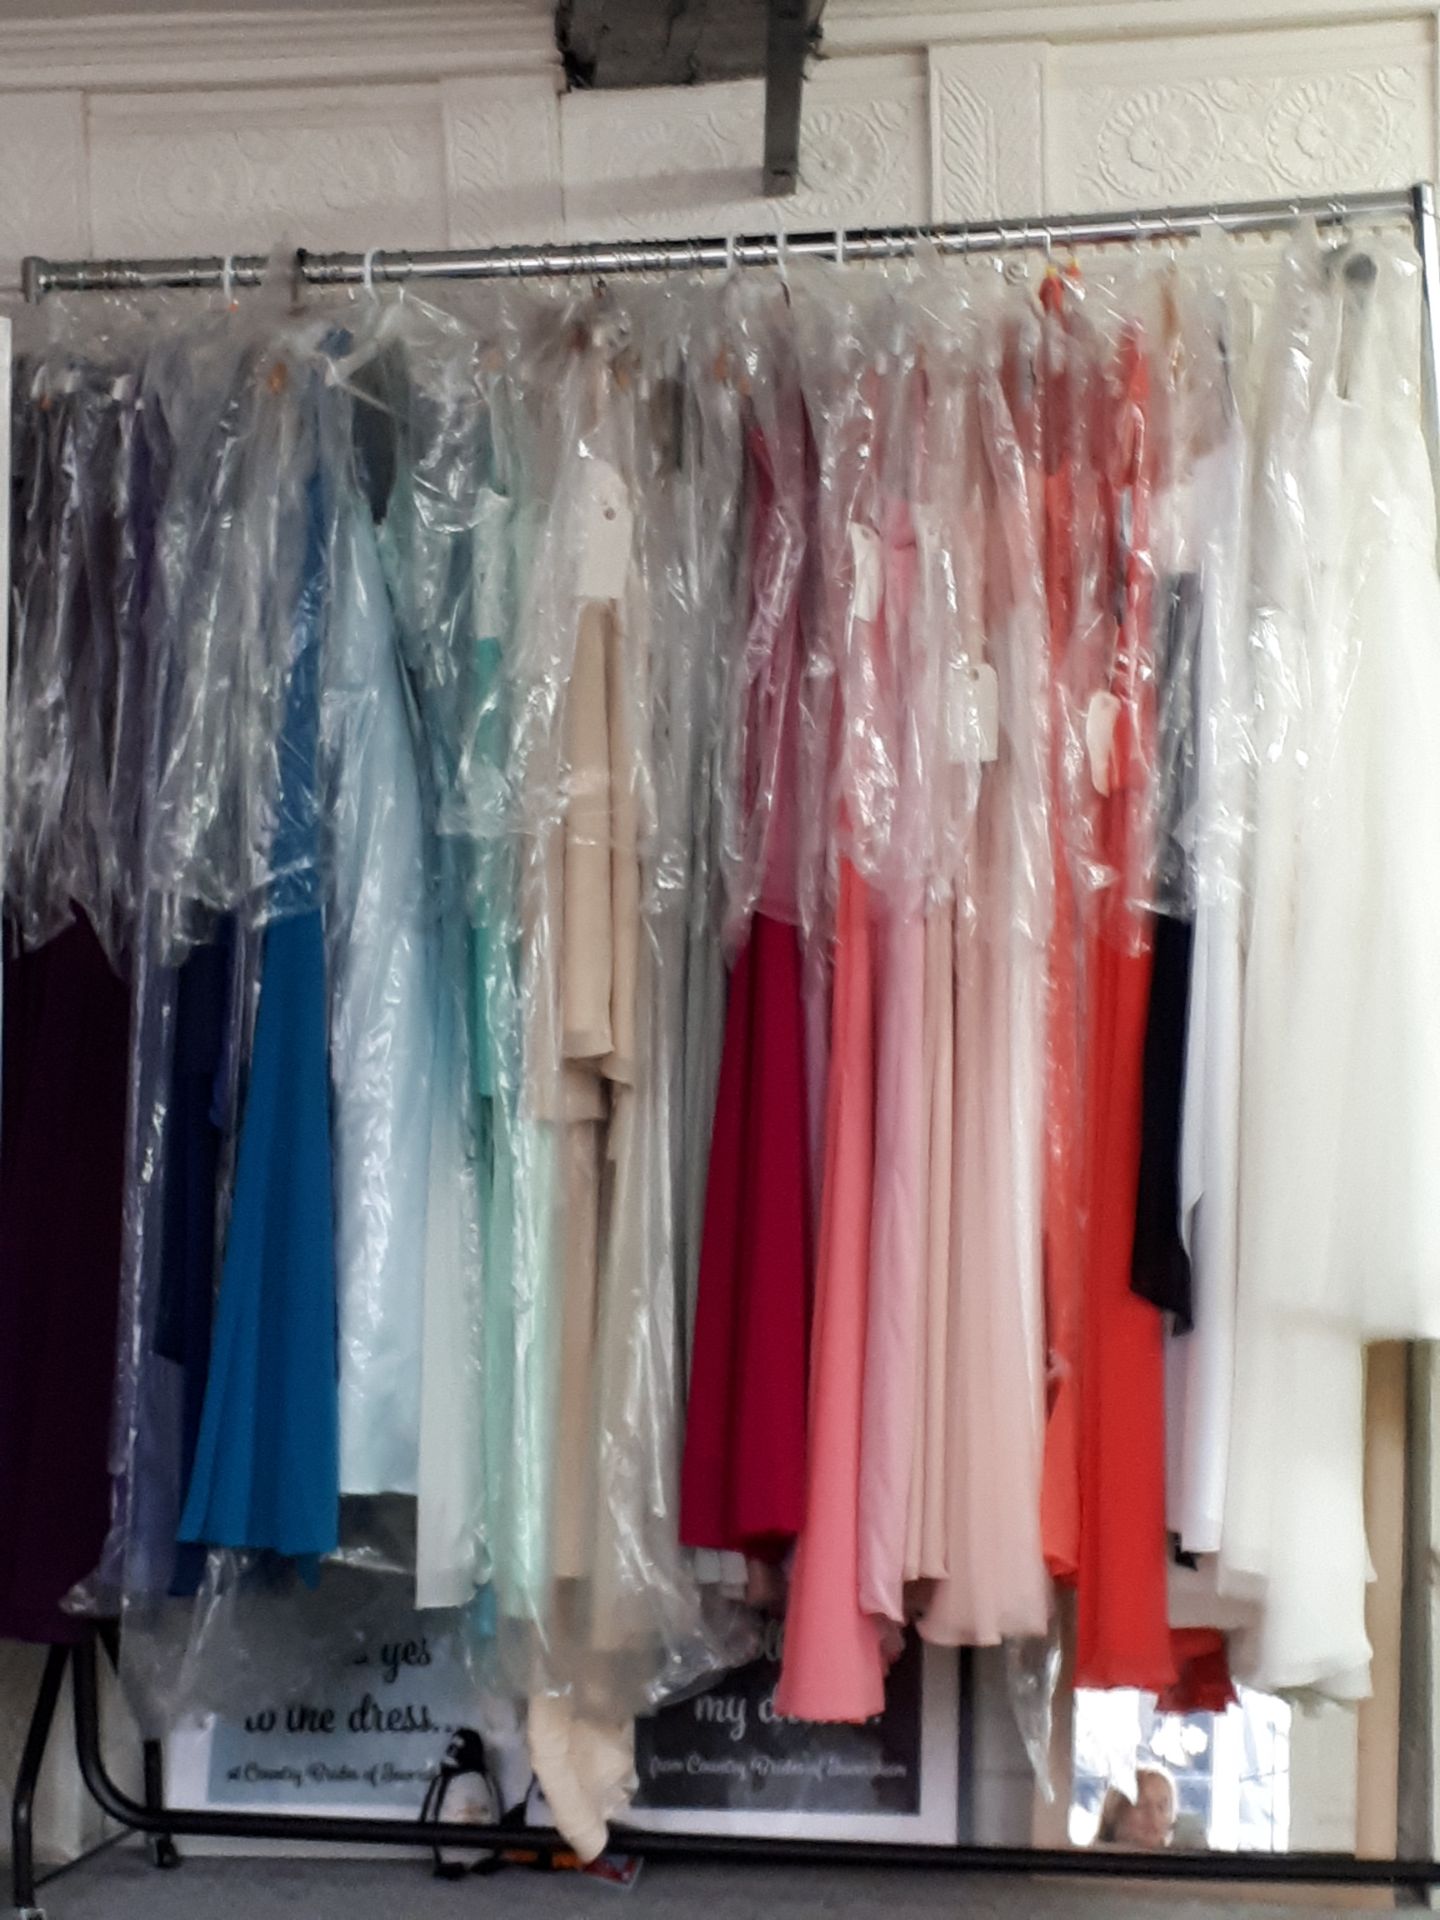 Bridesmaid Or Prom Dresses From Richard Designs Mixed Sizes and Colours. 10 Dresses